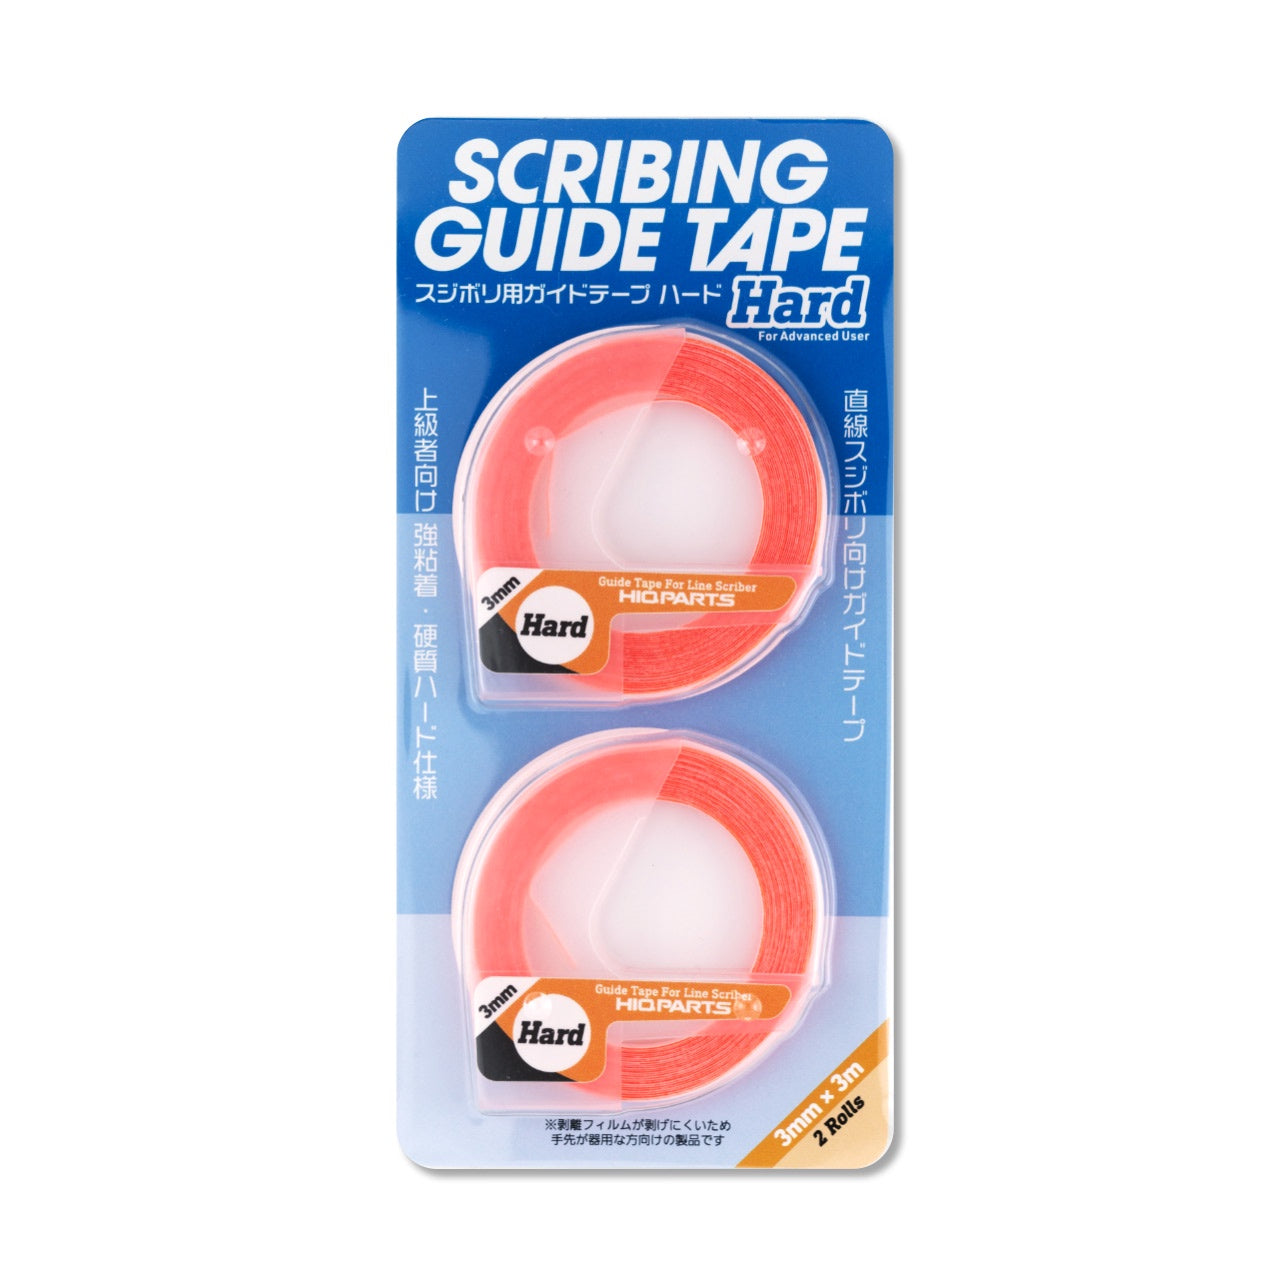 HiQ Parts Hard Surface Guide Tape for Scribing 6mm (3m, 2 Rolls)